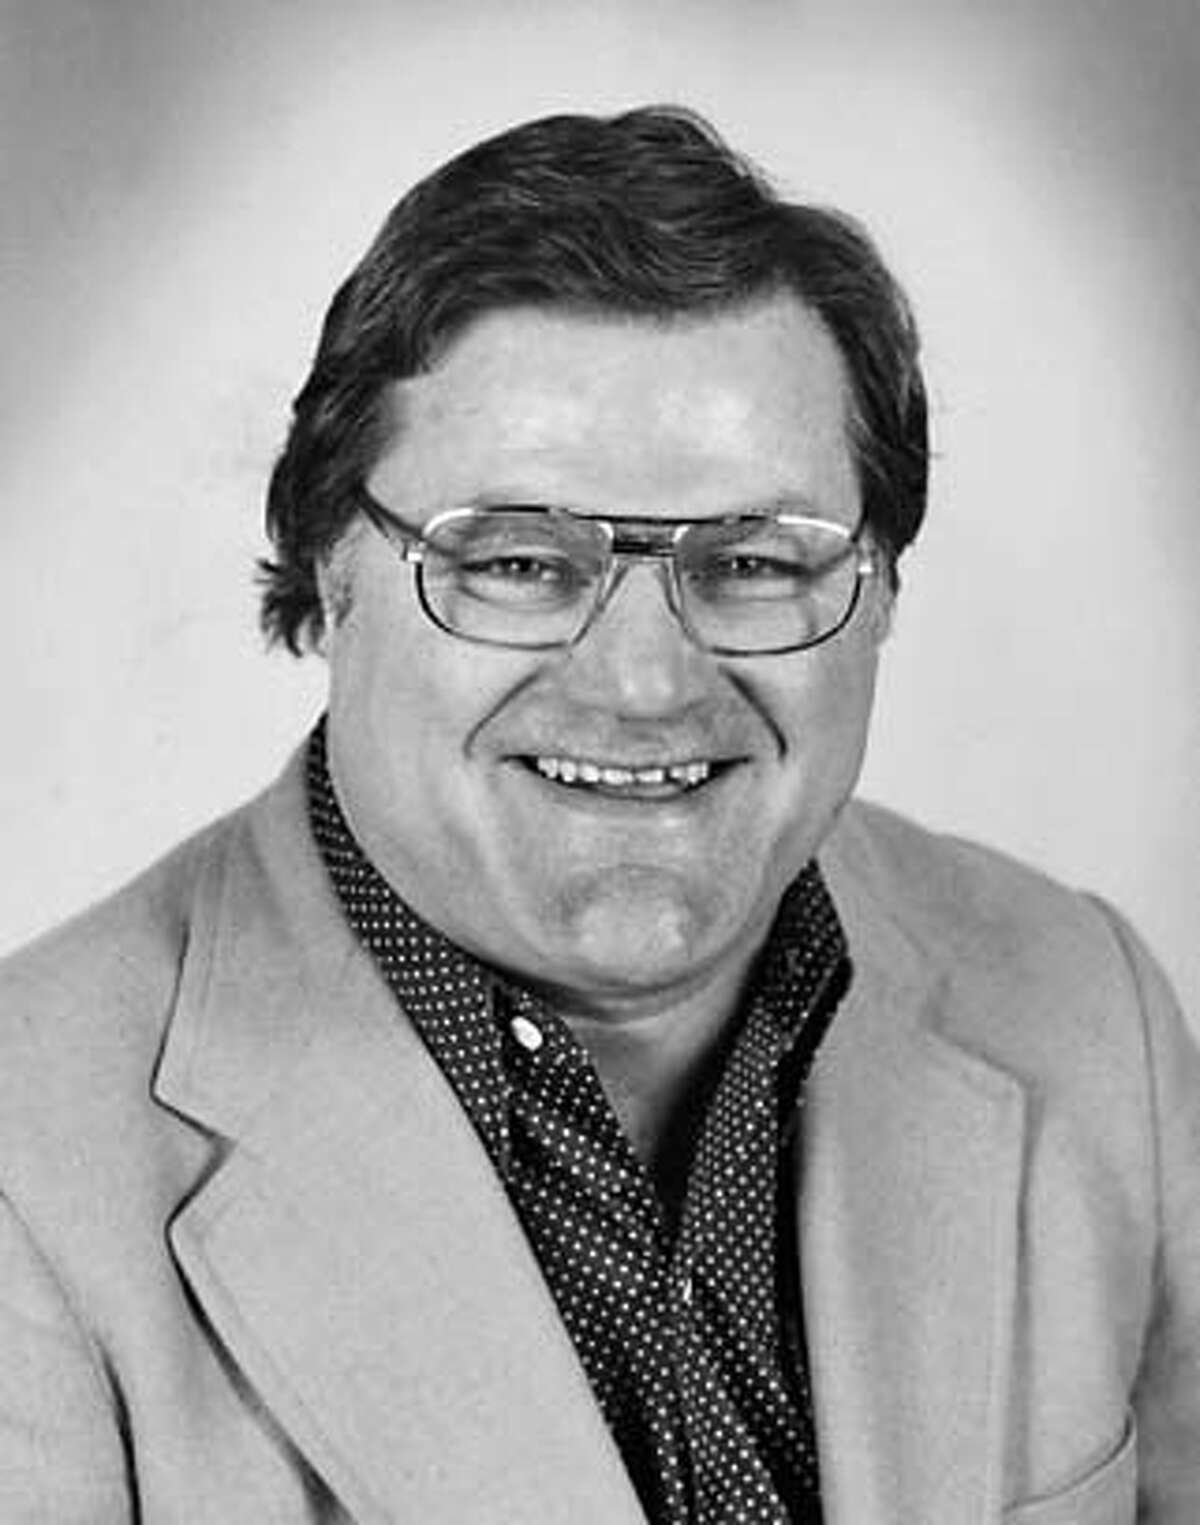 Monty Stickles, former 49ers tight end, Raiders and Cal football broadcaster and radio talk show host who died Sept. 06, 2006, aged 68.